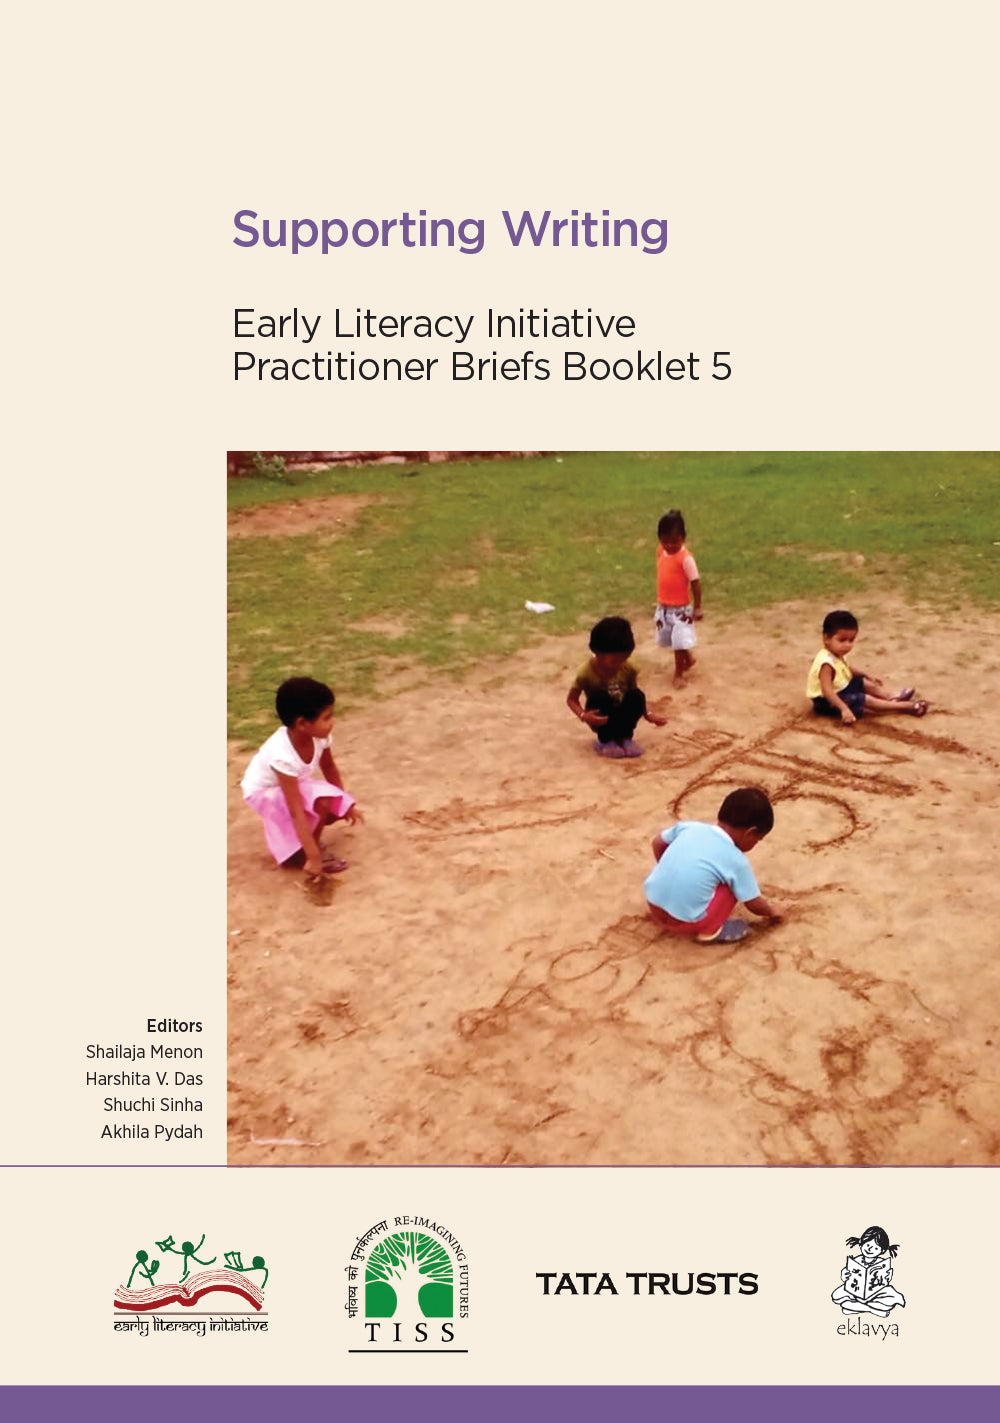 Supporting Writing Booklet 5 (ELI Series)